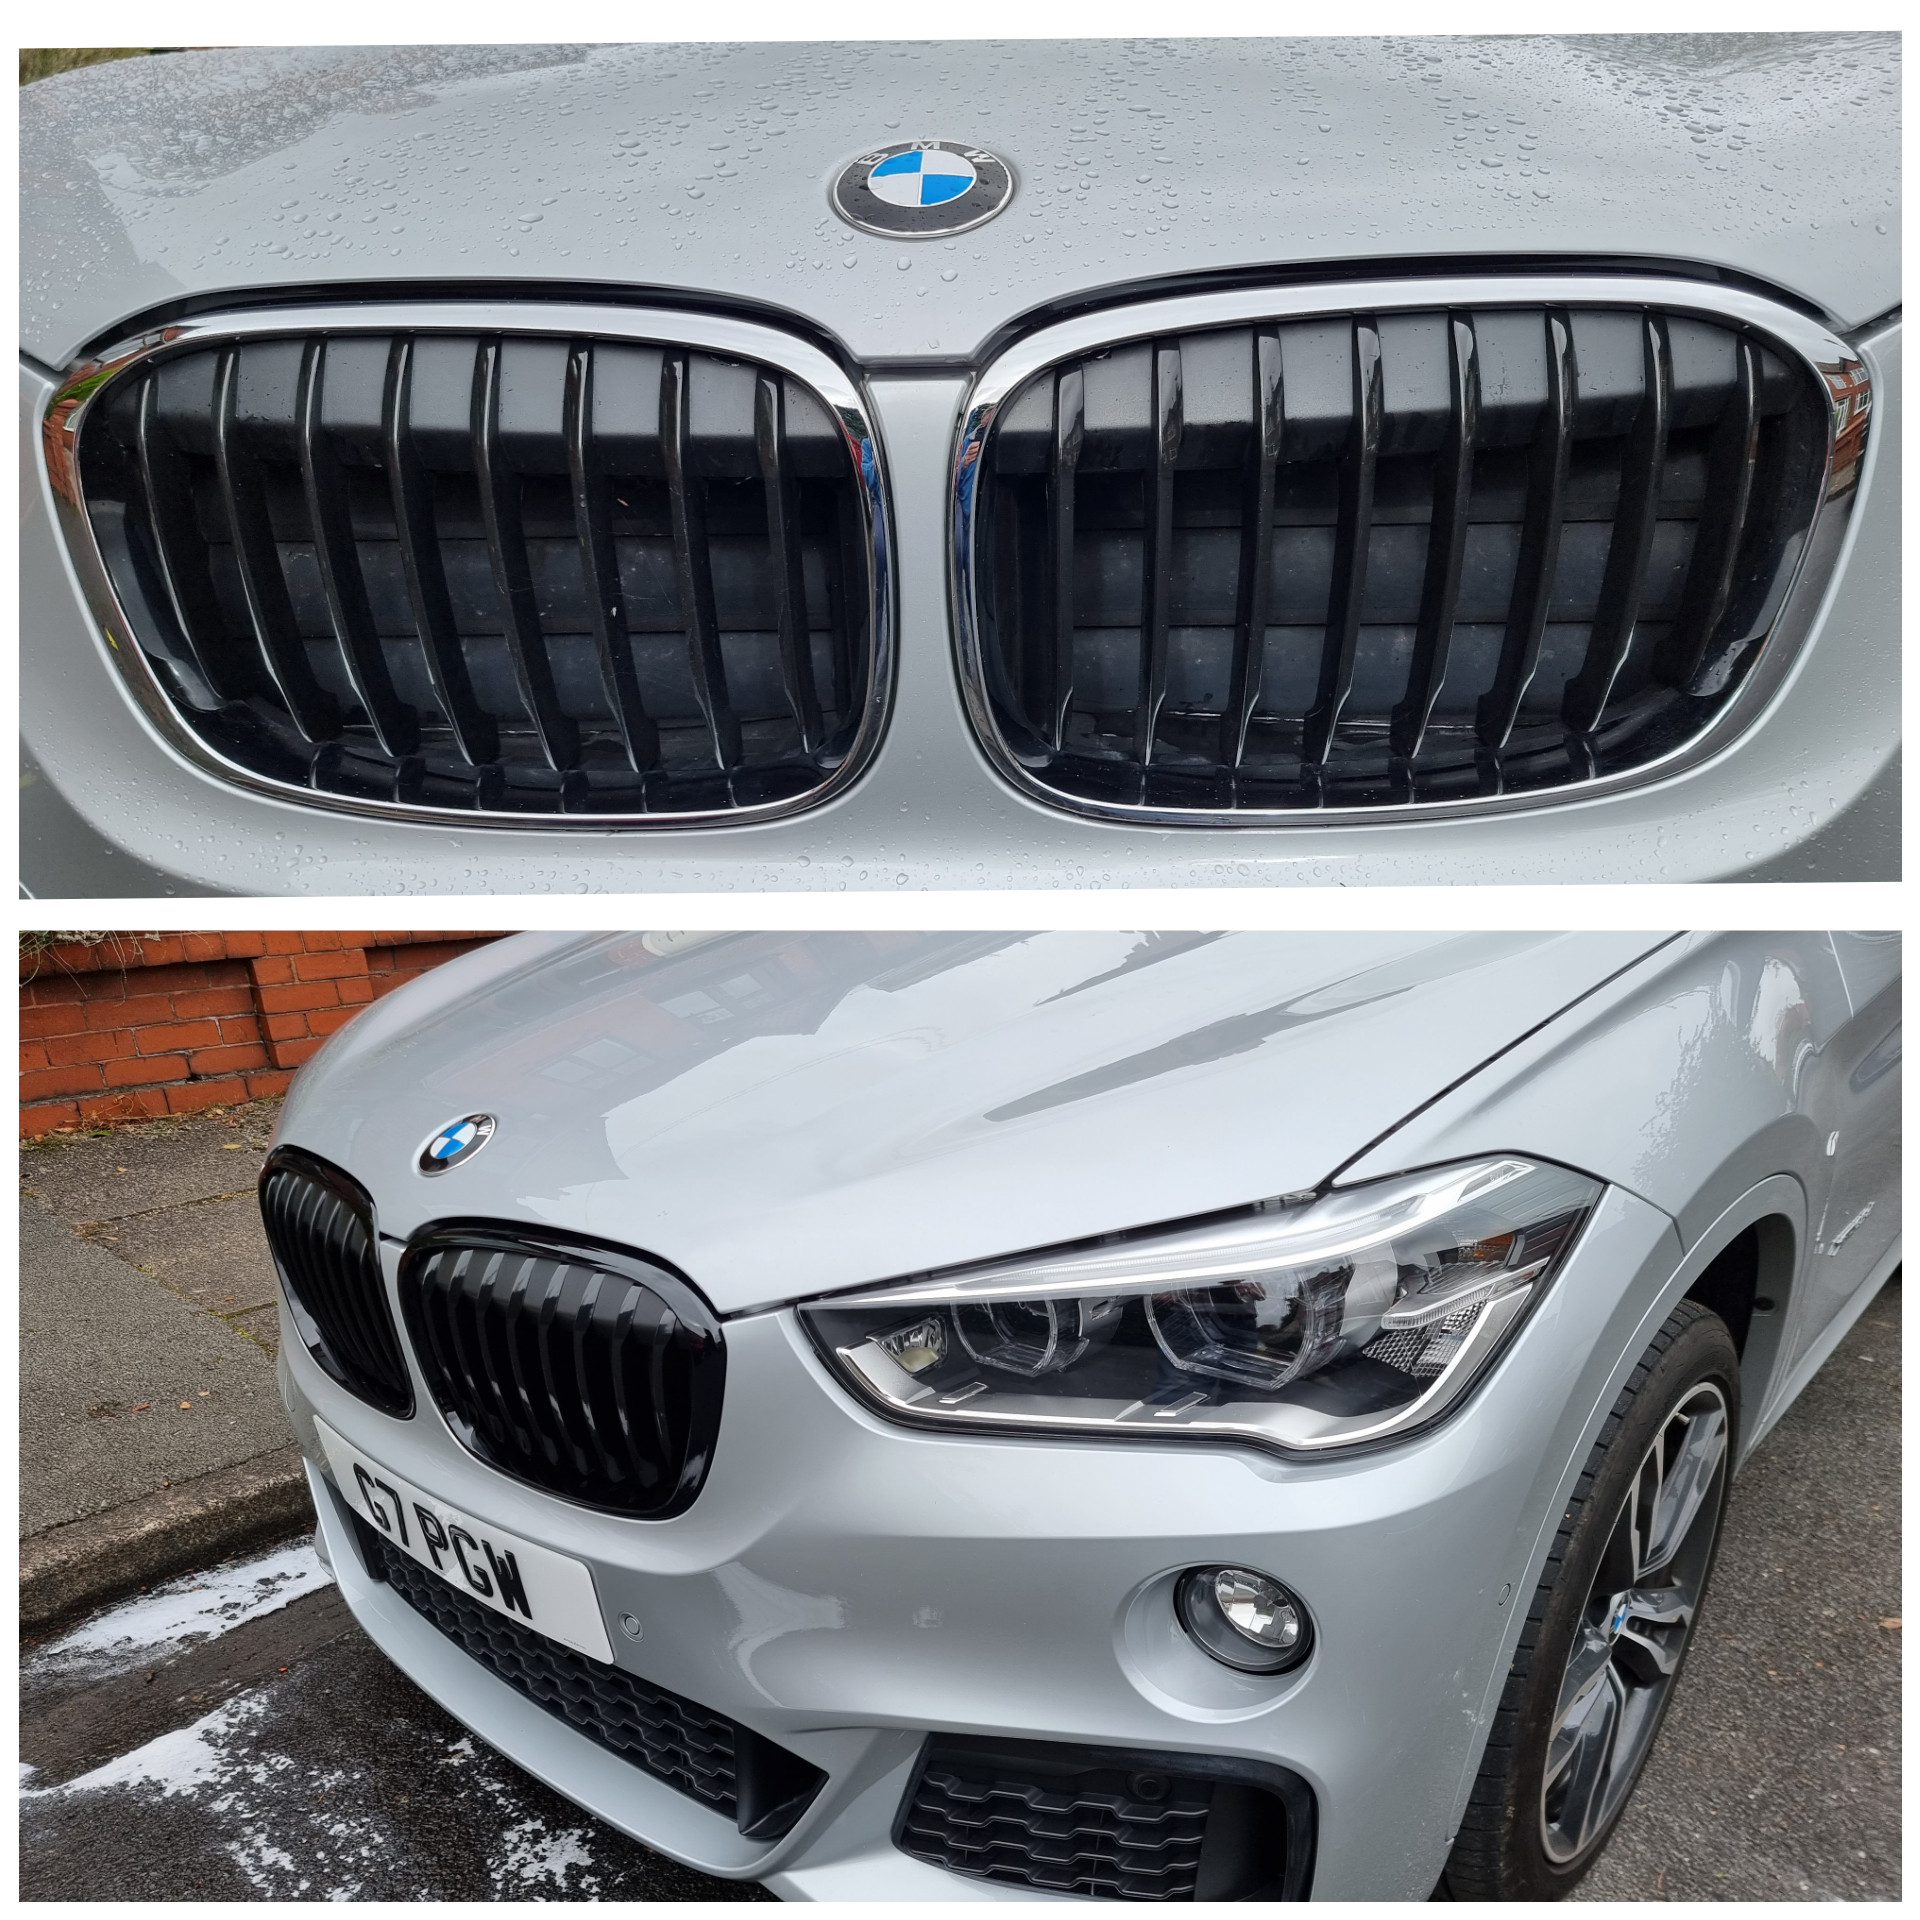 Replacing front grill on X1 F48 - BMW X1 Forum